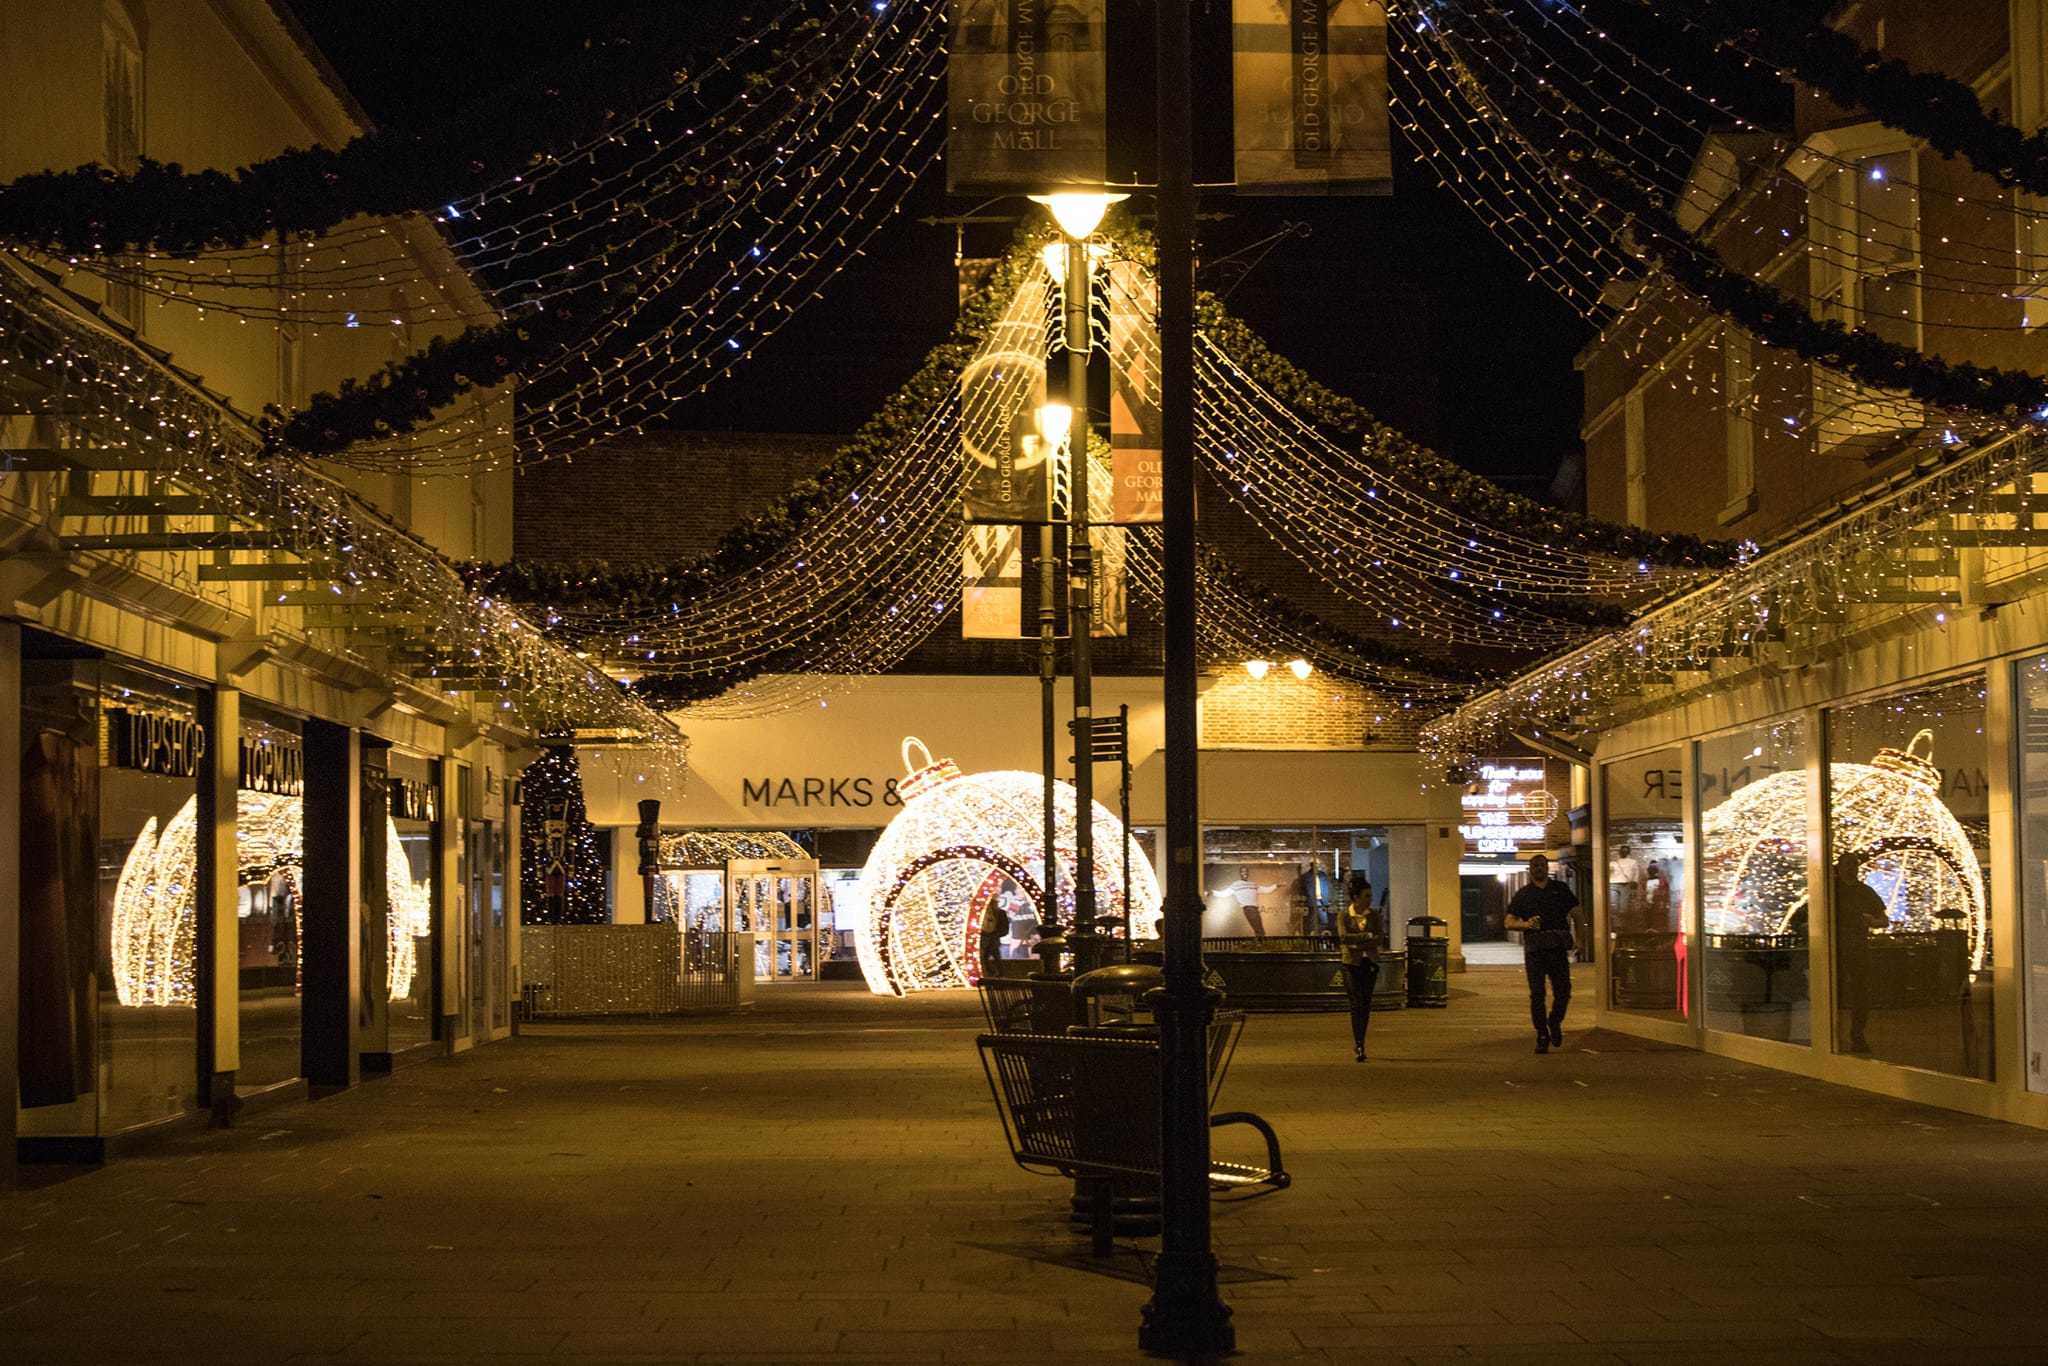 DECEMBER - The festive Old George Mall. By Paul Harwood